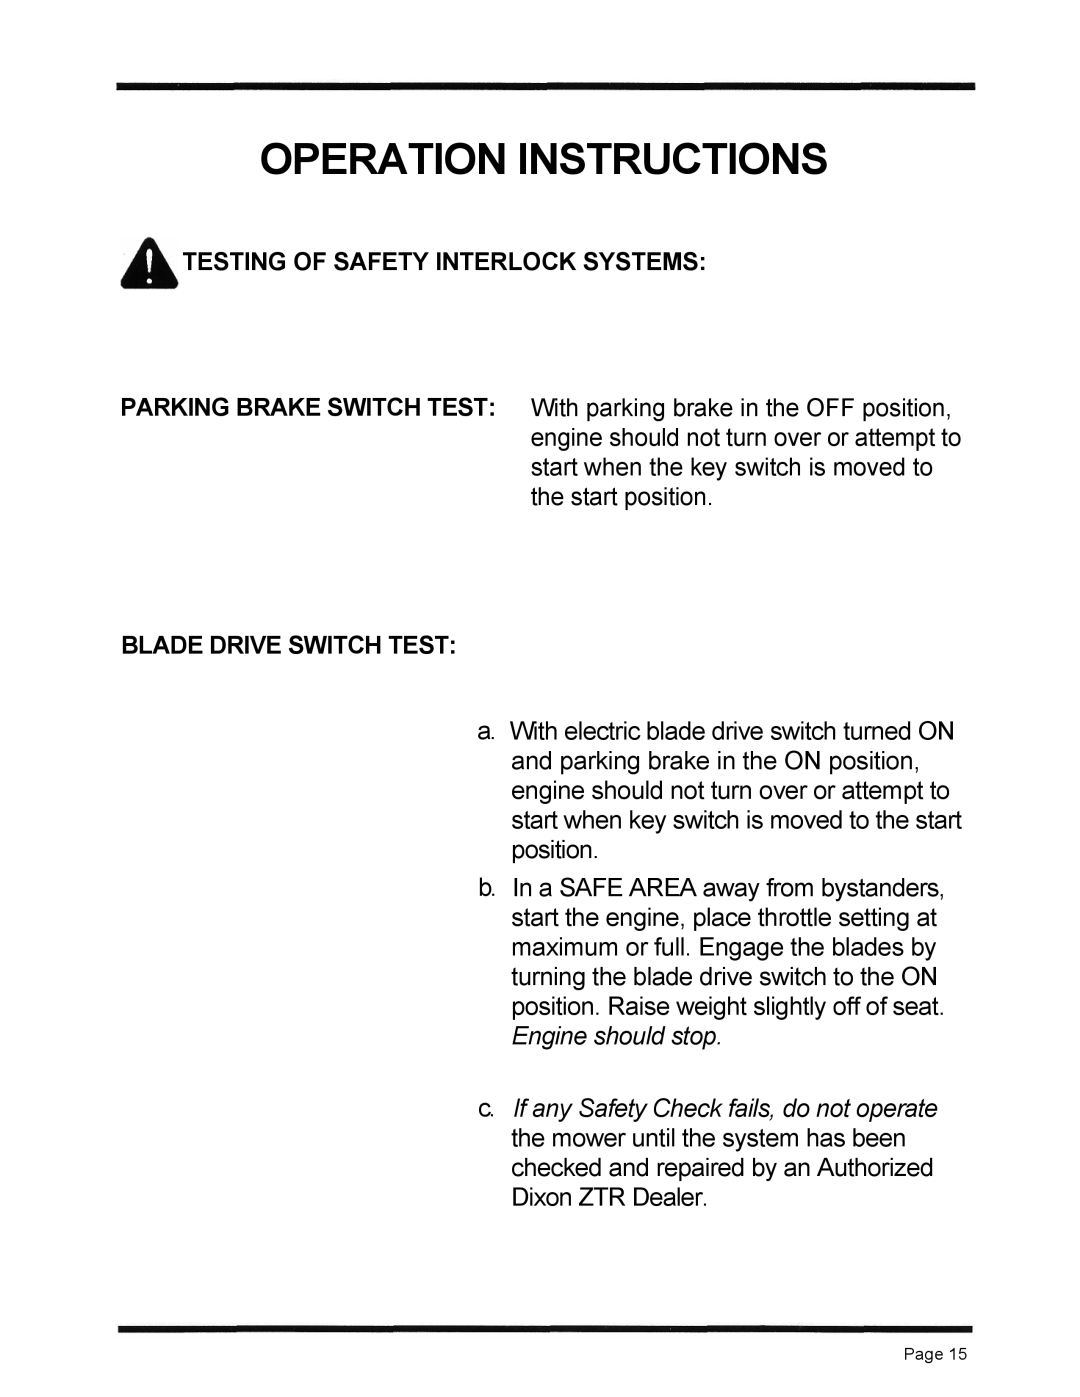 Dixon 6601 Series manual Testing Of Safety Interlock Systems, Parking Brake Switch Test Blade Drive Switch Test 